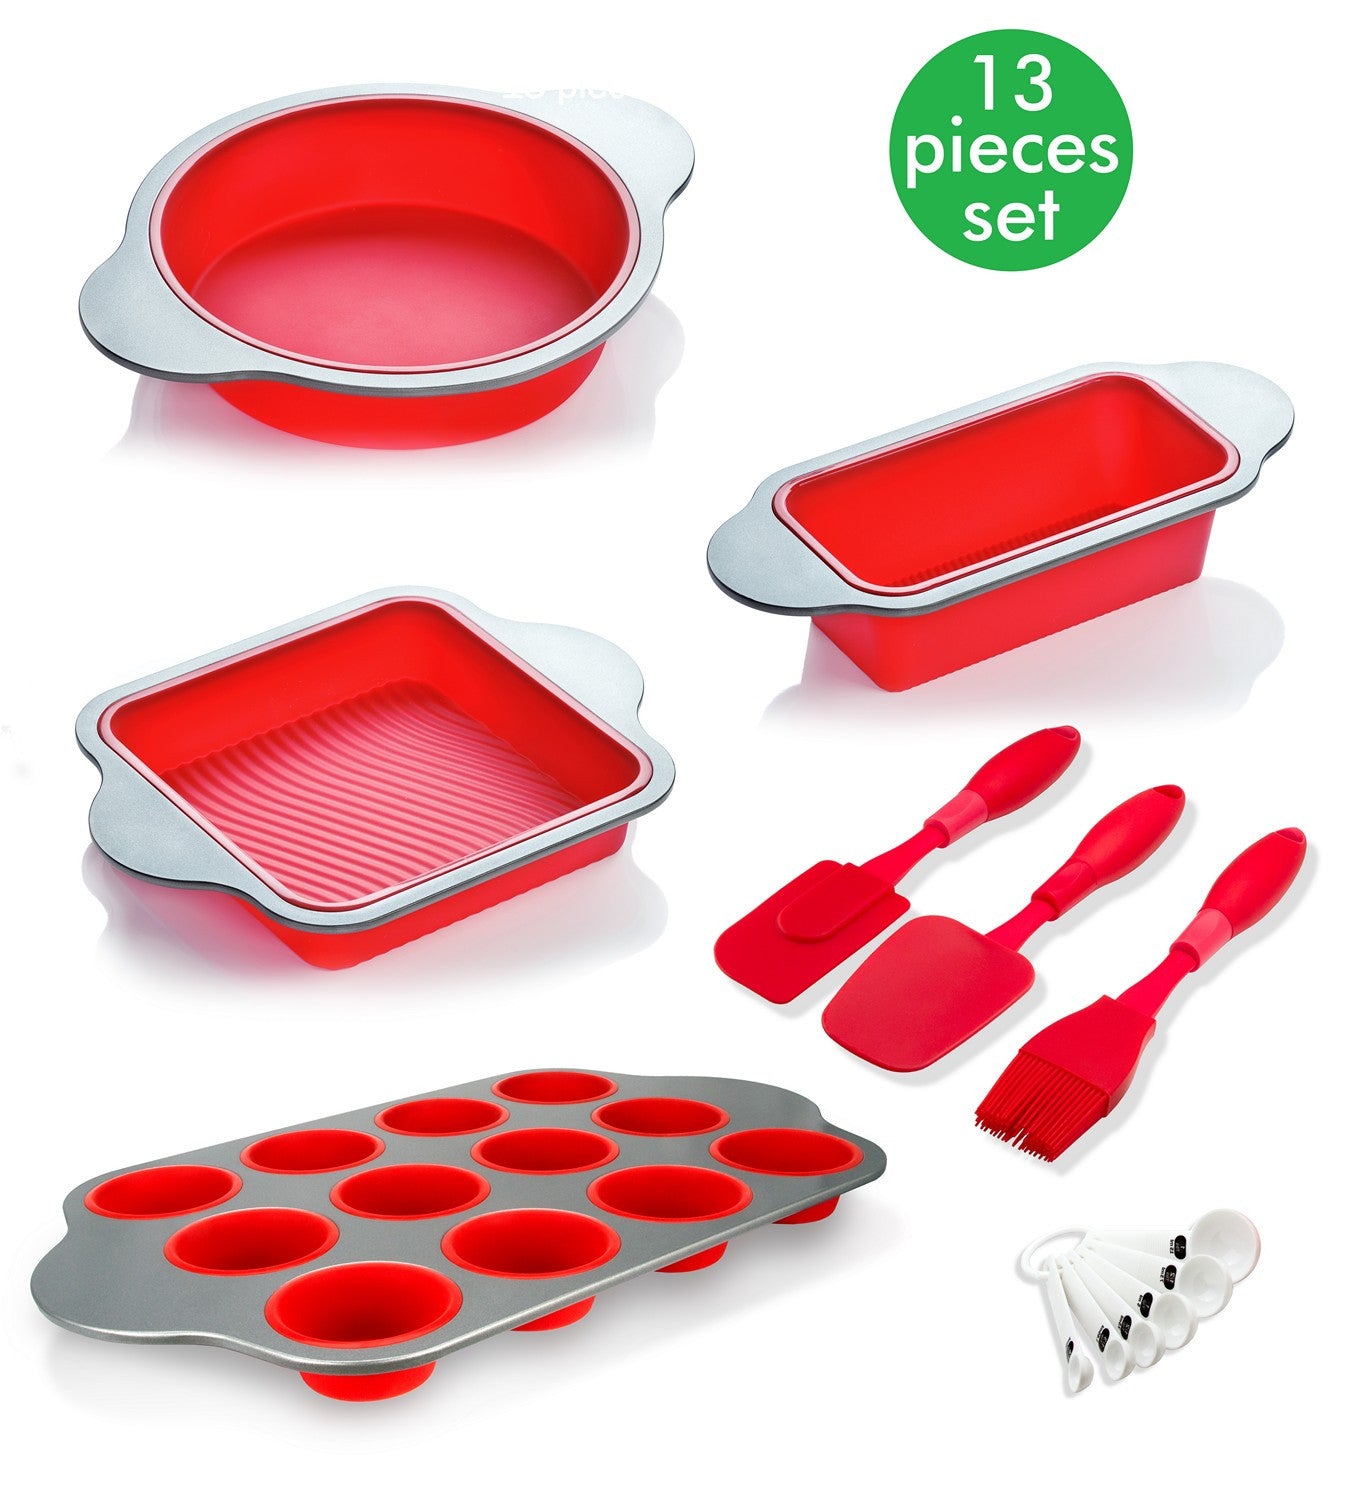 Silicone Bake Set (Pack of 1 or 10) – Polar